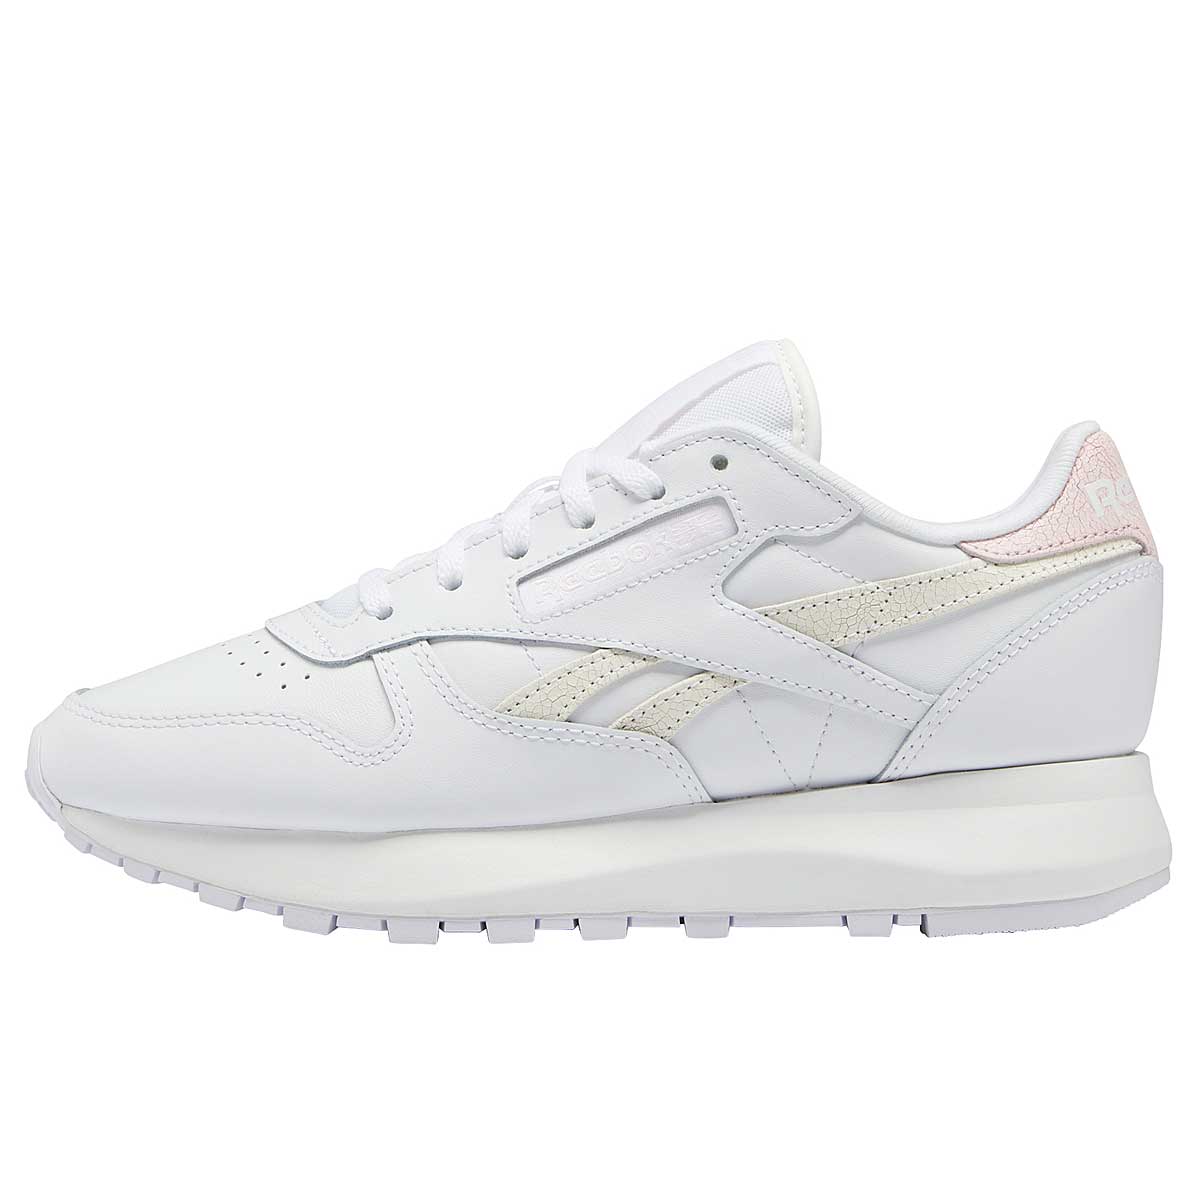 Buy LEATHER SP Womens for 0.0 on KICKZ.com!